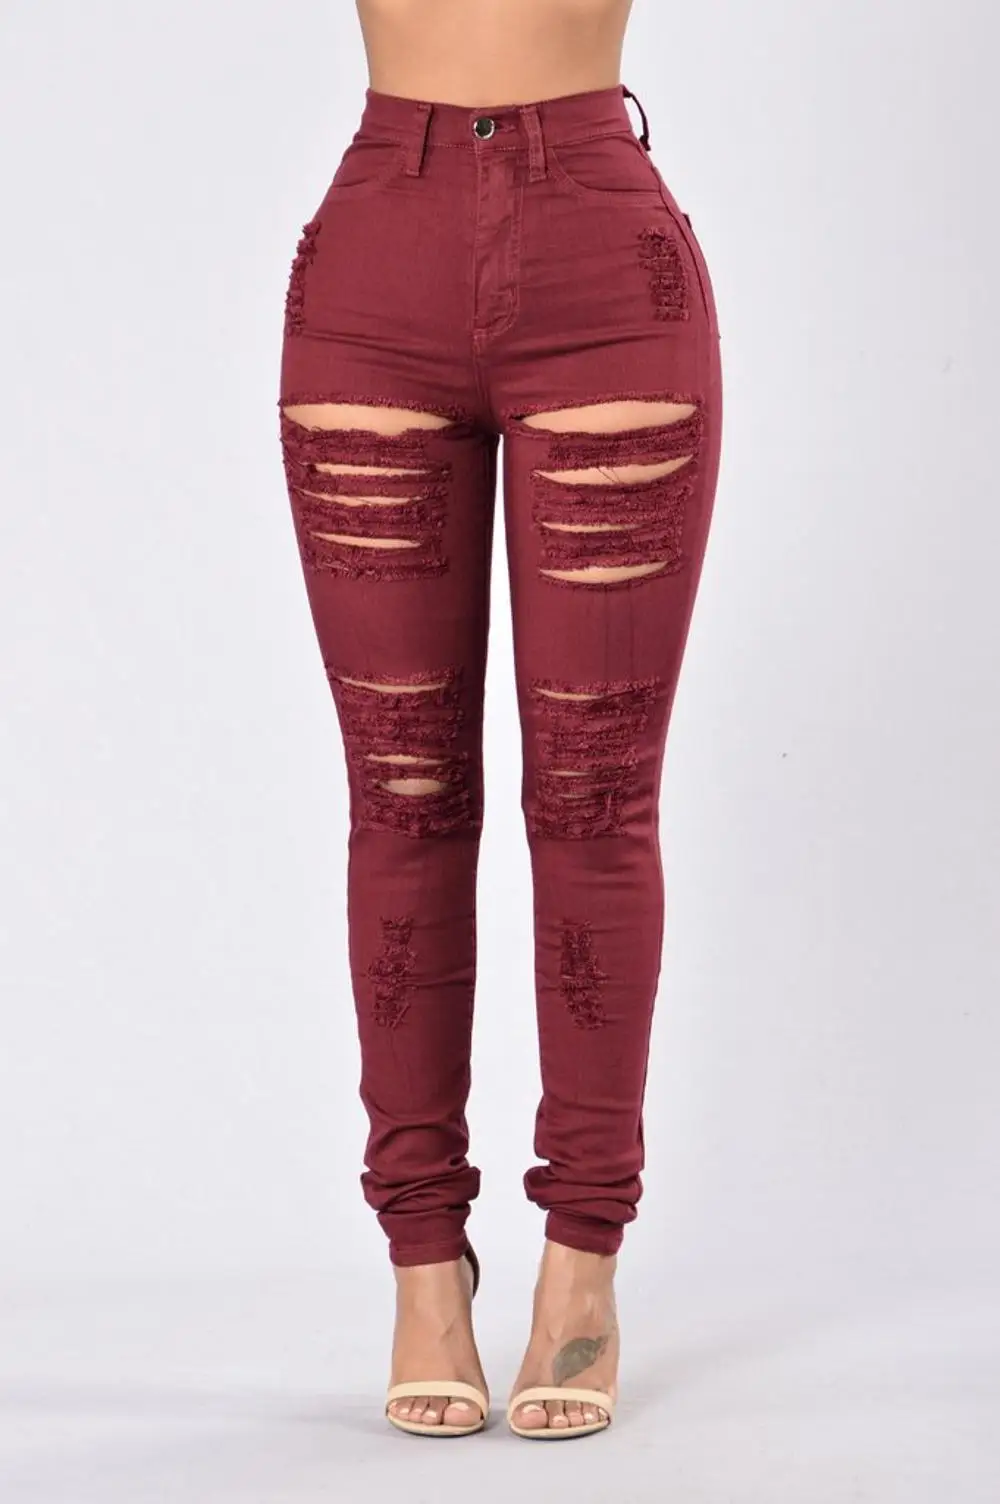 Plus Size Hole Women Wine Red Jeans Ripped Jeans Pencil Chic Girl